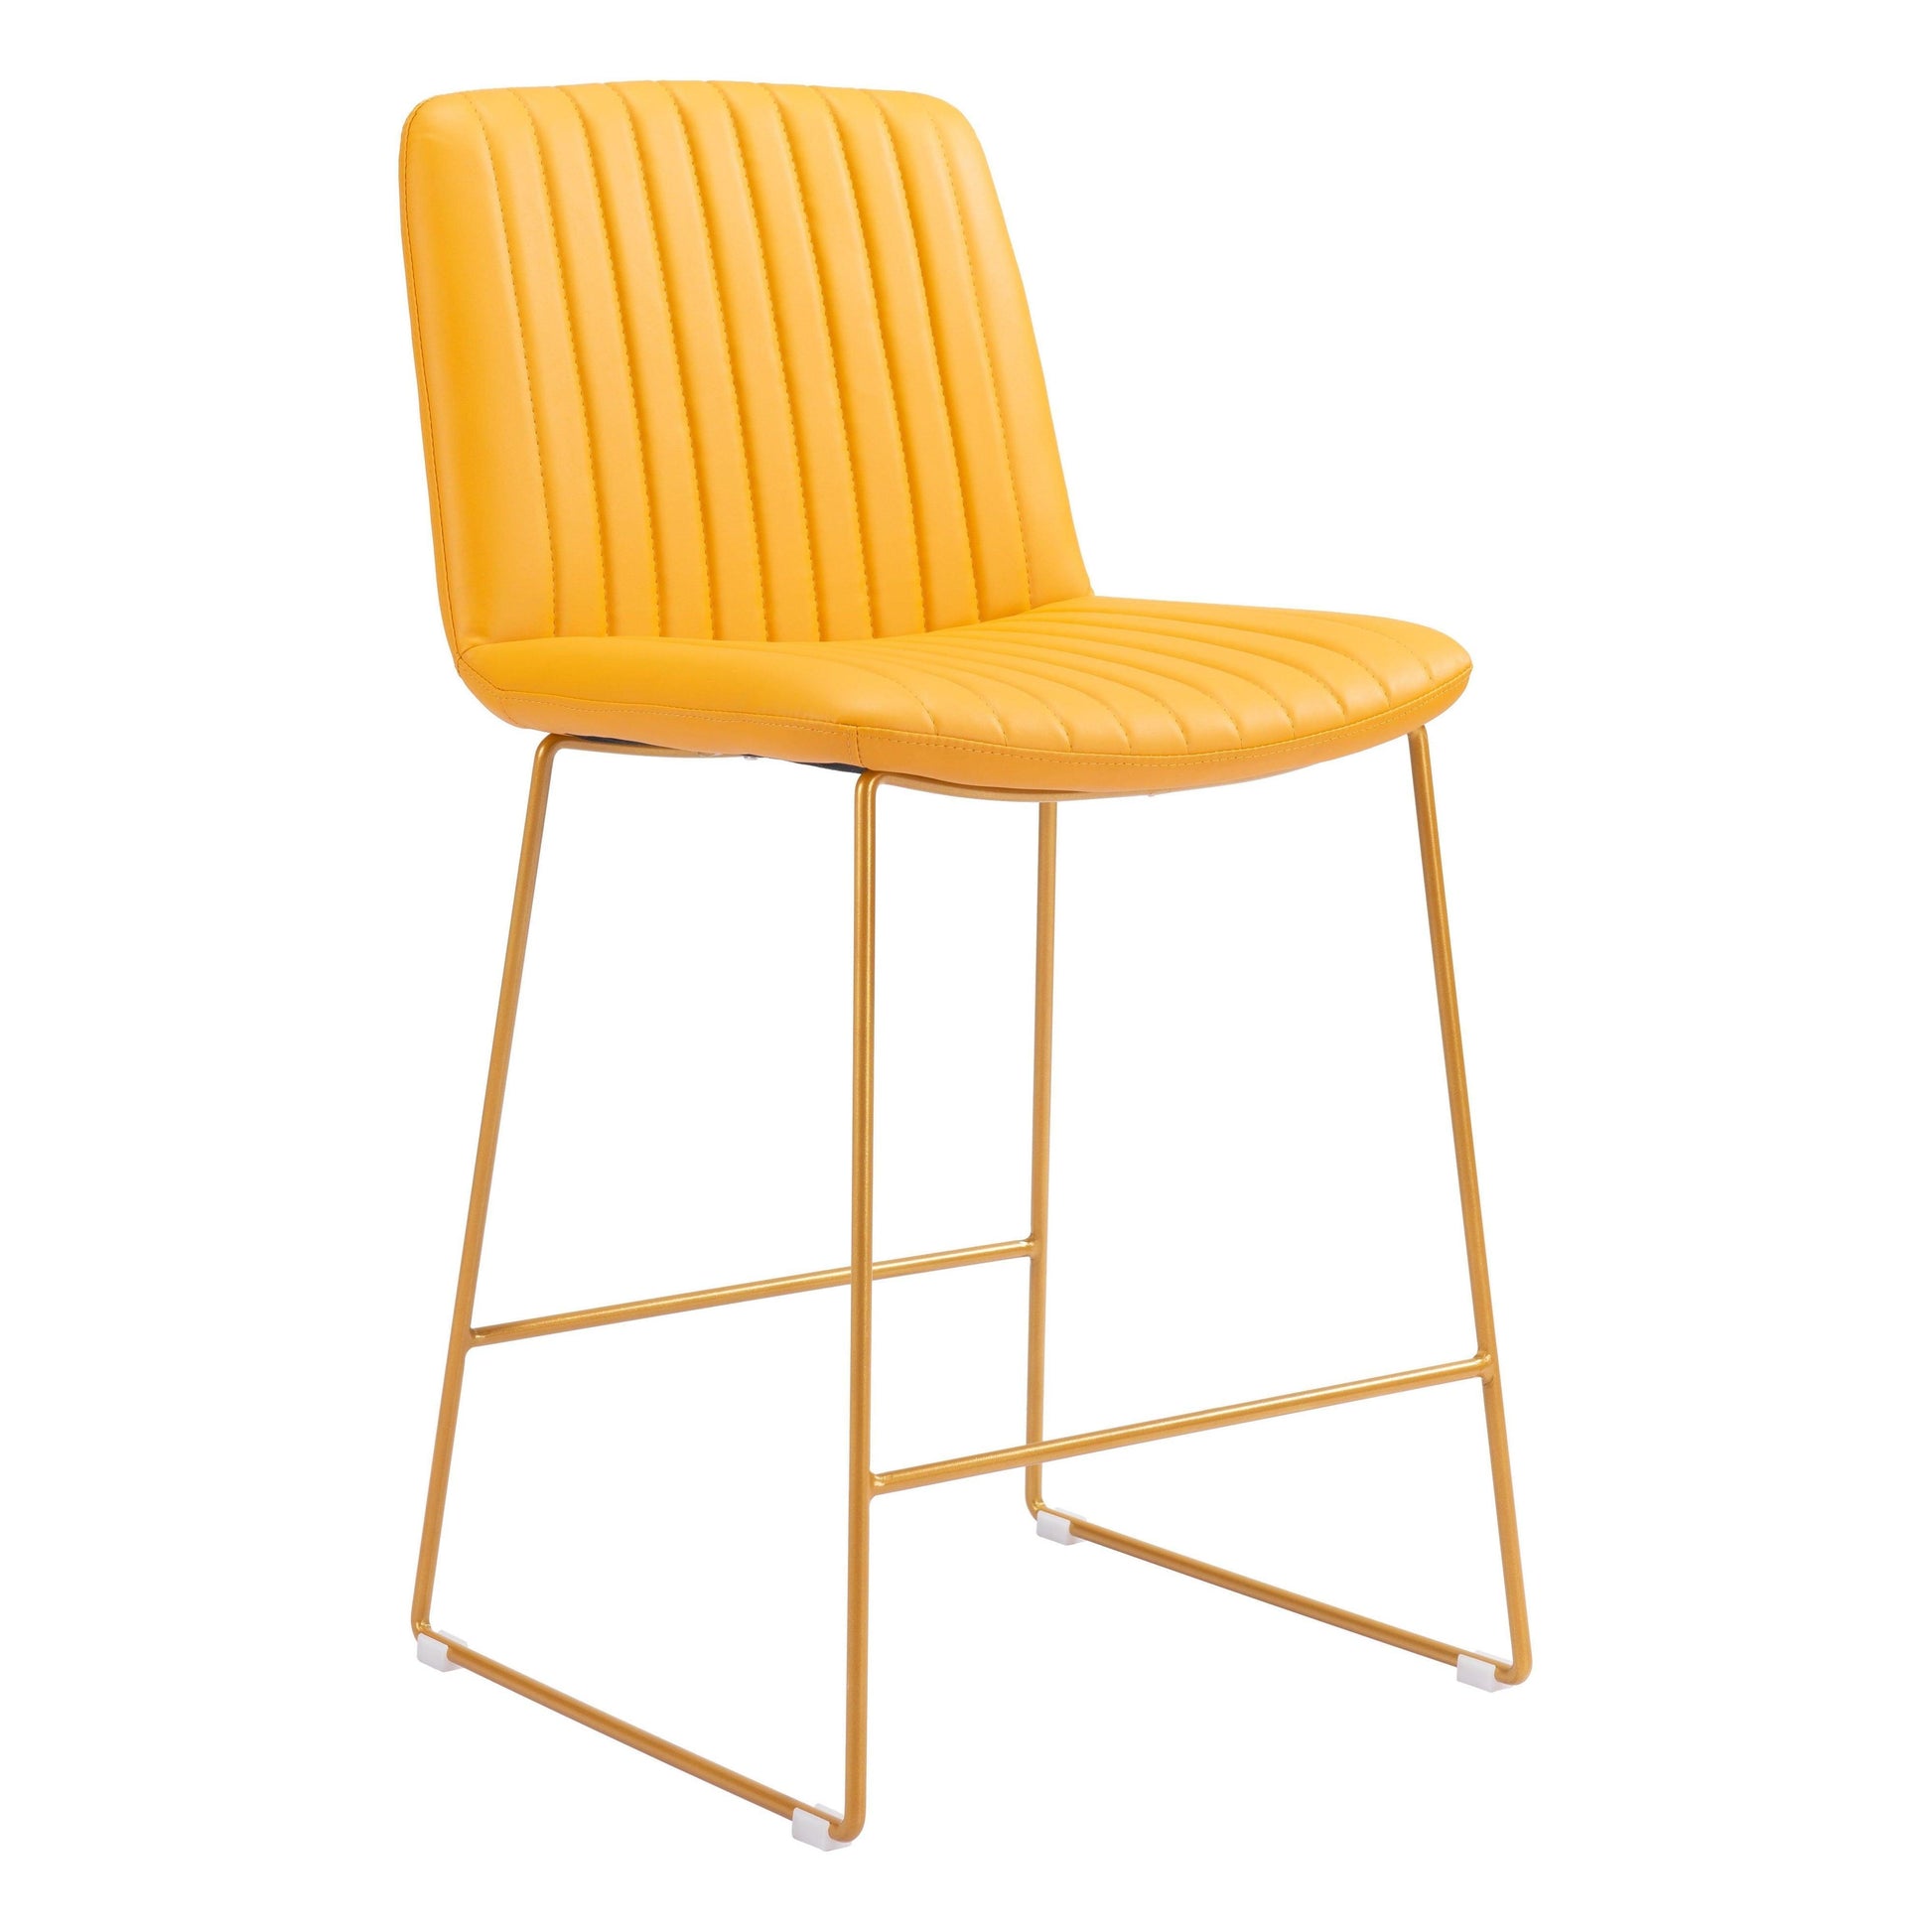 Mode Counter Chair (Set of 2) Yellow - Sideboards and Things Back Type_With Back, Brand_Zuo Modern, Color_Yellow, Depth_20-30, Finish_Powder Coated, Height_30-40, Materials_Metal, Materials_Upholstery, Metal Type_Steel, Number of Pieces_2PC Set, Product Type_Counter Height, Upholstery Type_Leather, Upholstery Type_Vegan Leather, Width_20-30